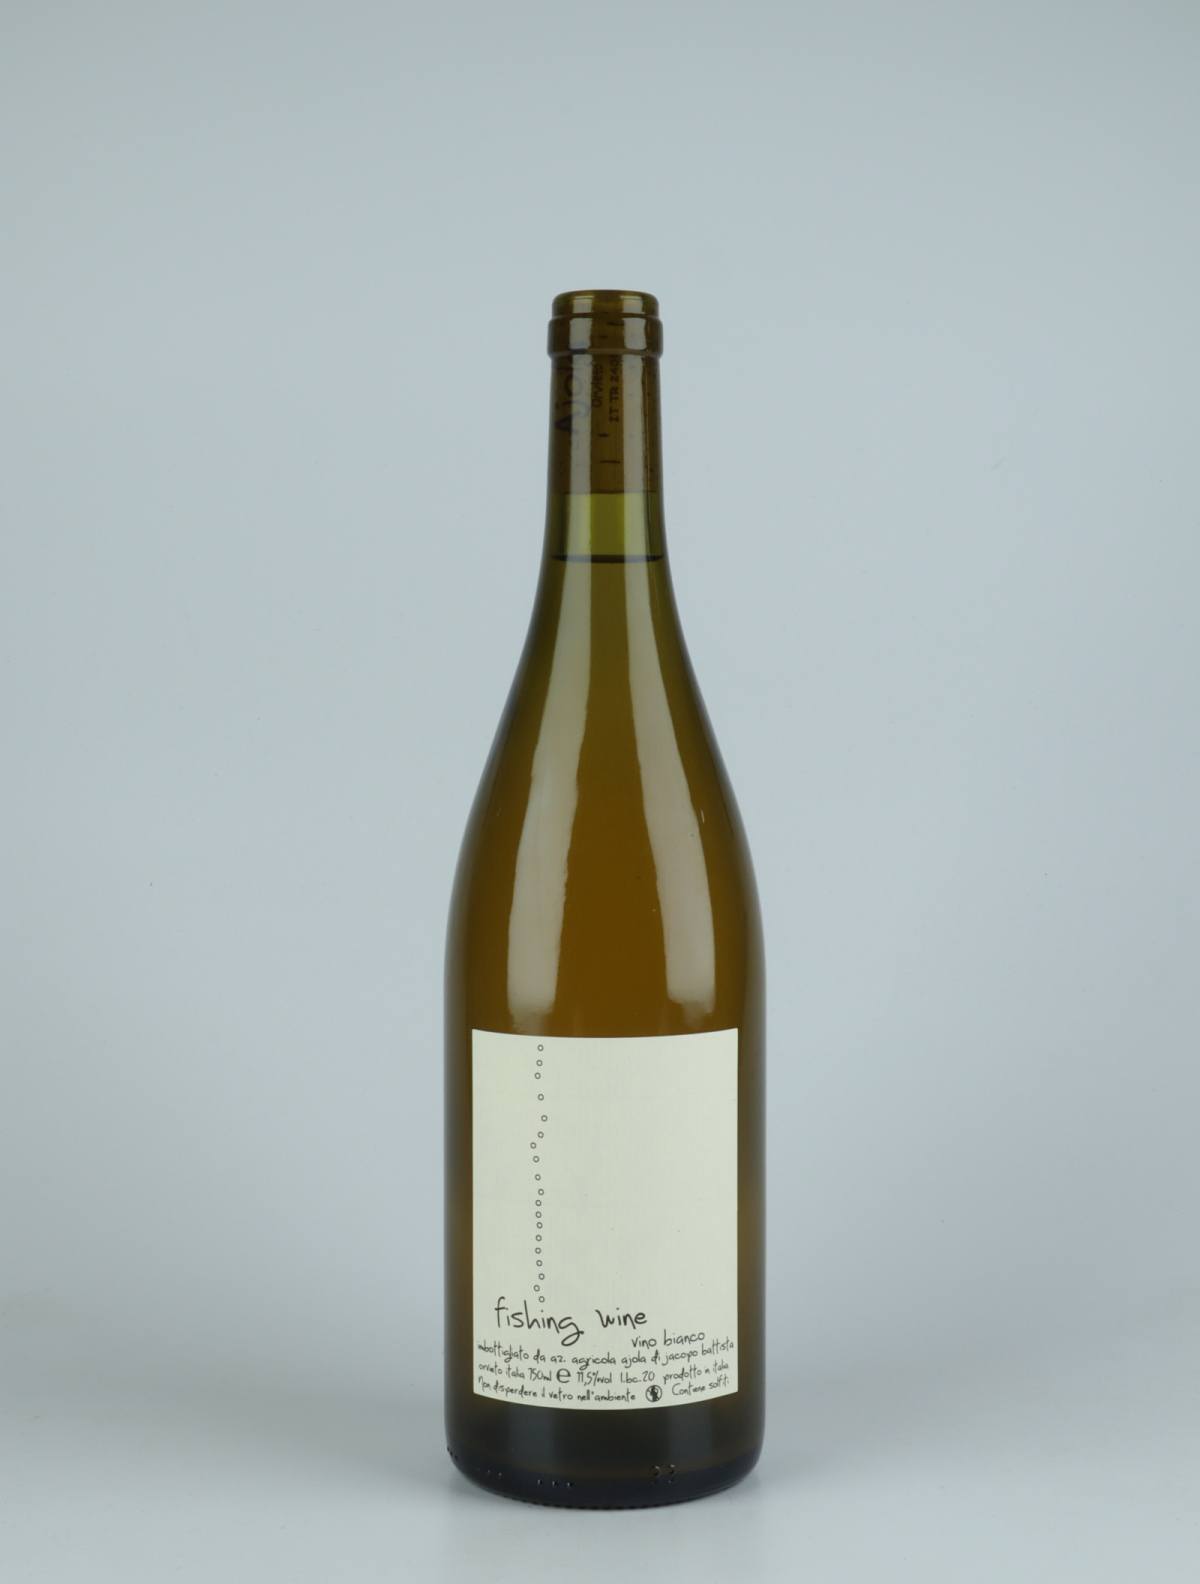 A bottle 2020 Bianco Fishing Wine White wine from Ajola, Umbria in Italy